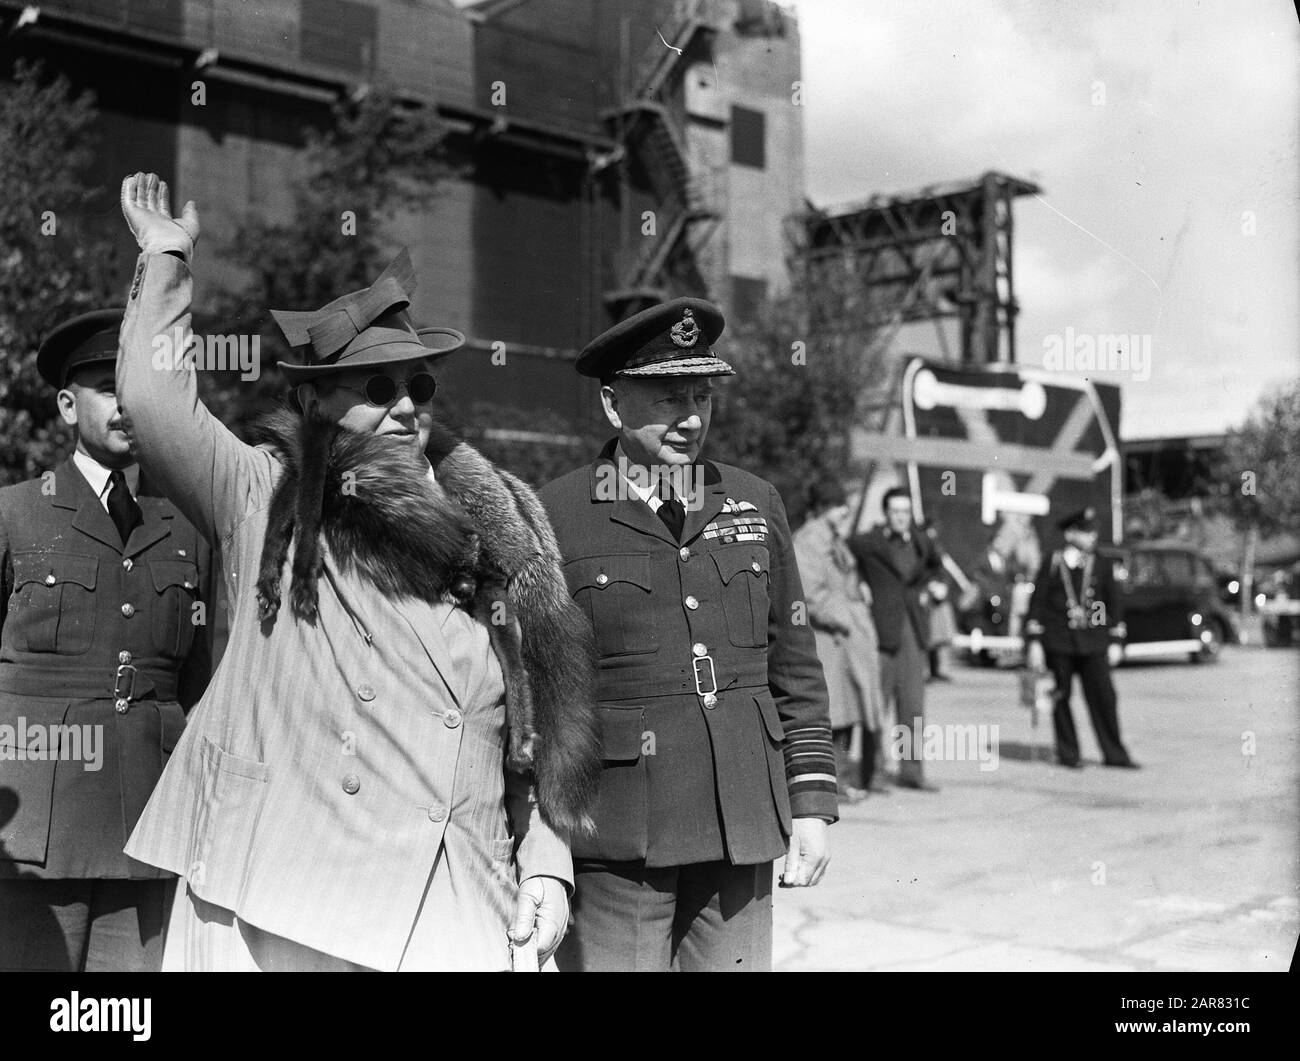 Princess Juliana returns to England after staying in Canada. She was met at the airport by Queen Wilhelmina. Queen Wilhelmina waves to her daughter with next to her Air Chief Marshall sir Frederick Bowhill Date: 9 September 1944 Location: Great Britain Keywords: Queens, Officers, Second World War, Airports Personal name: Bowhill, Frederick, Wilhelmina (Queen Netherlands)  : Unknown/Public Domain, Stock Photo